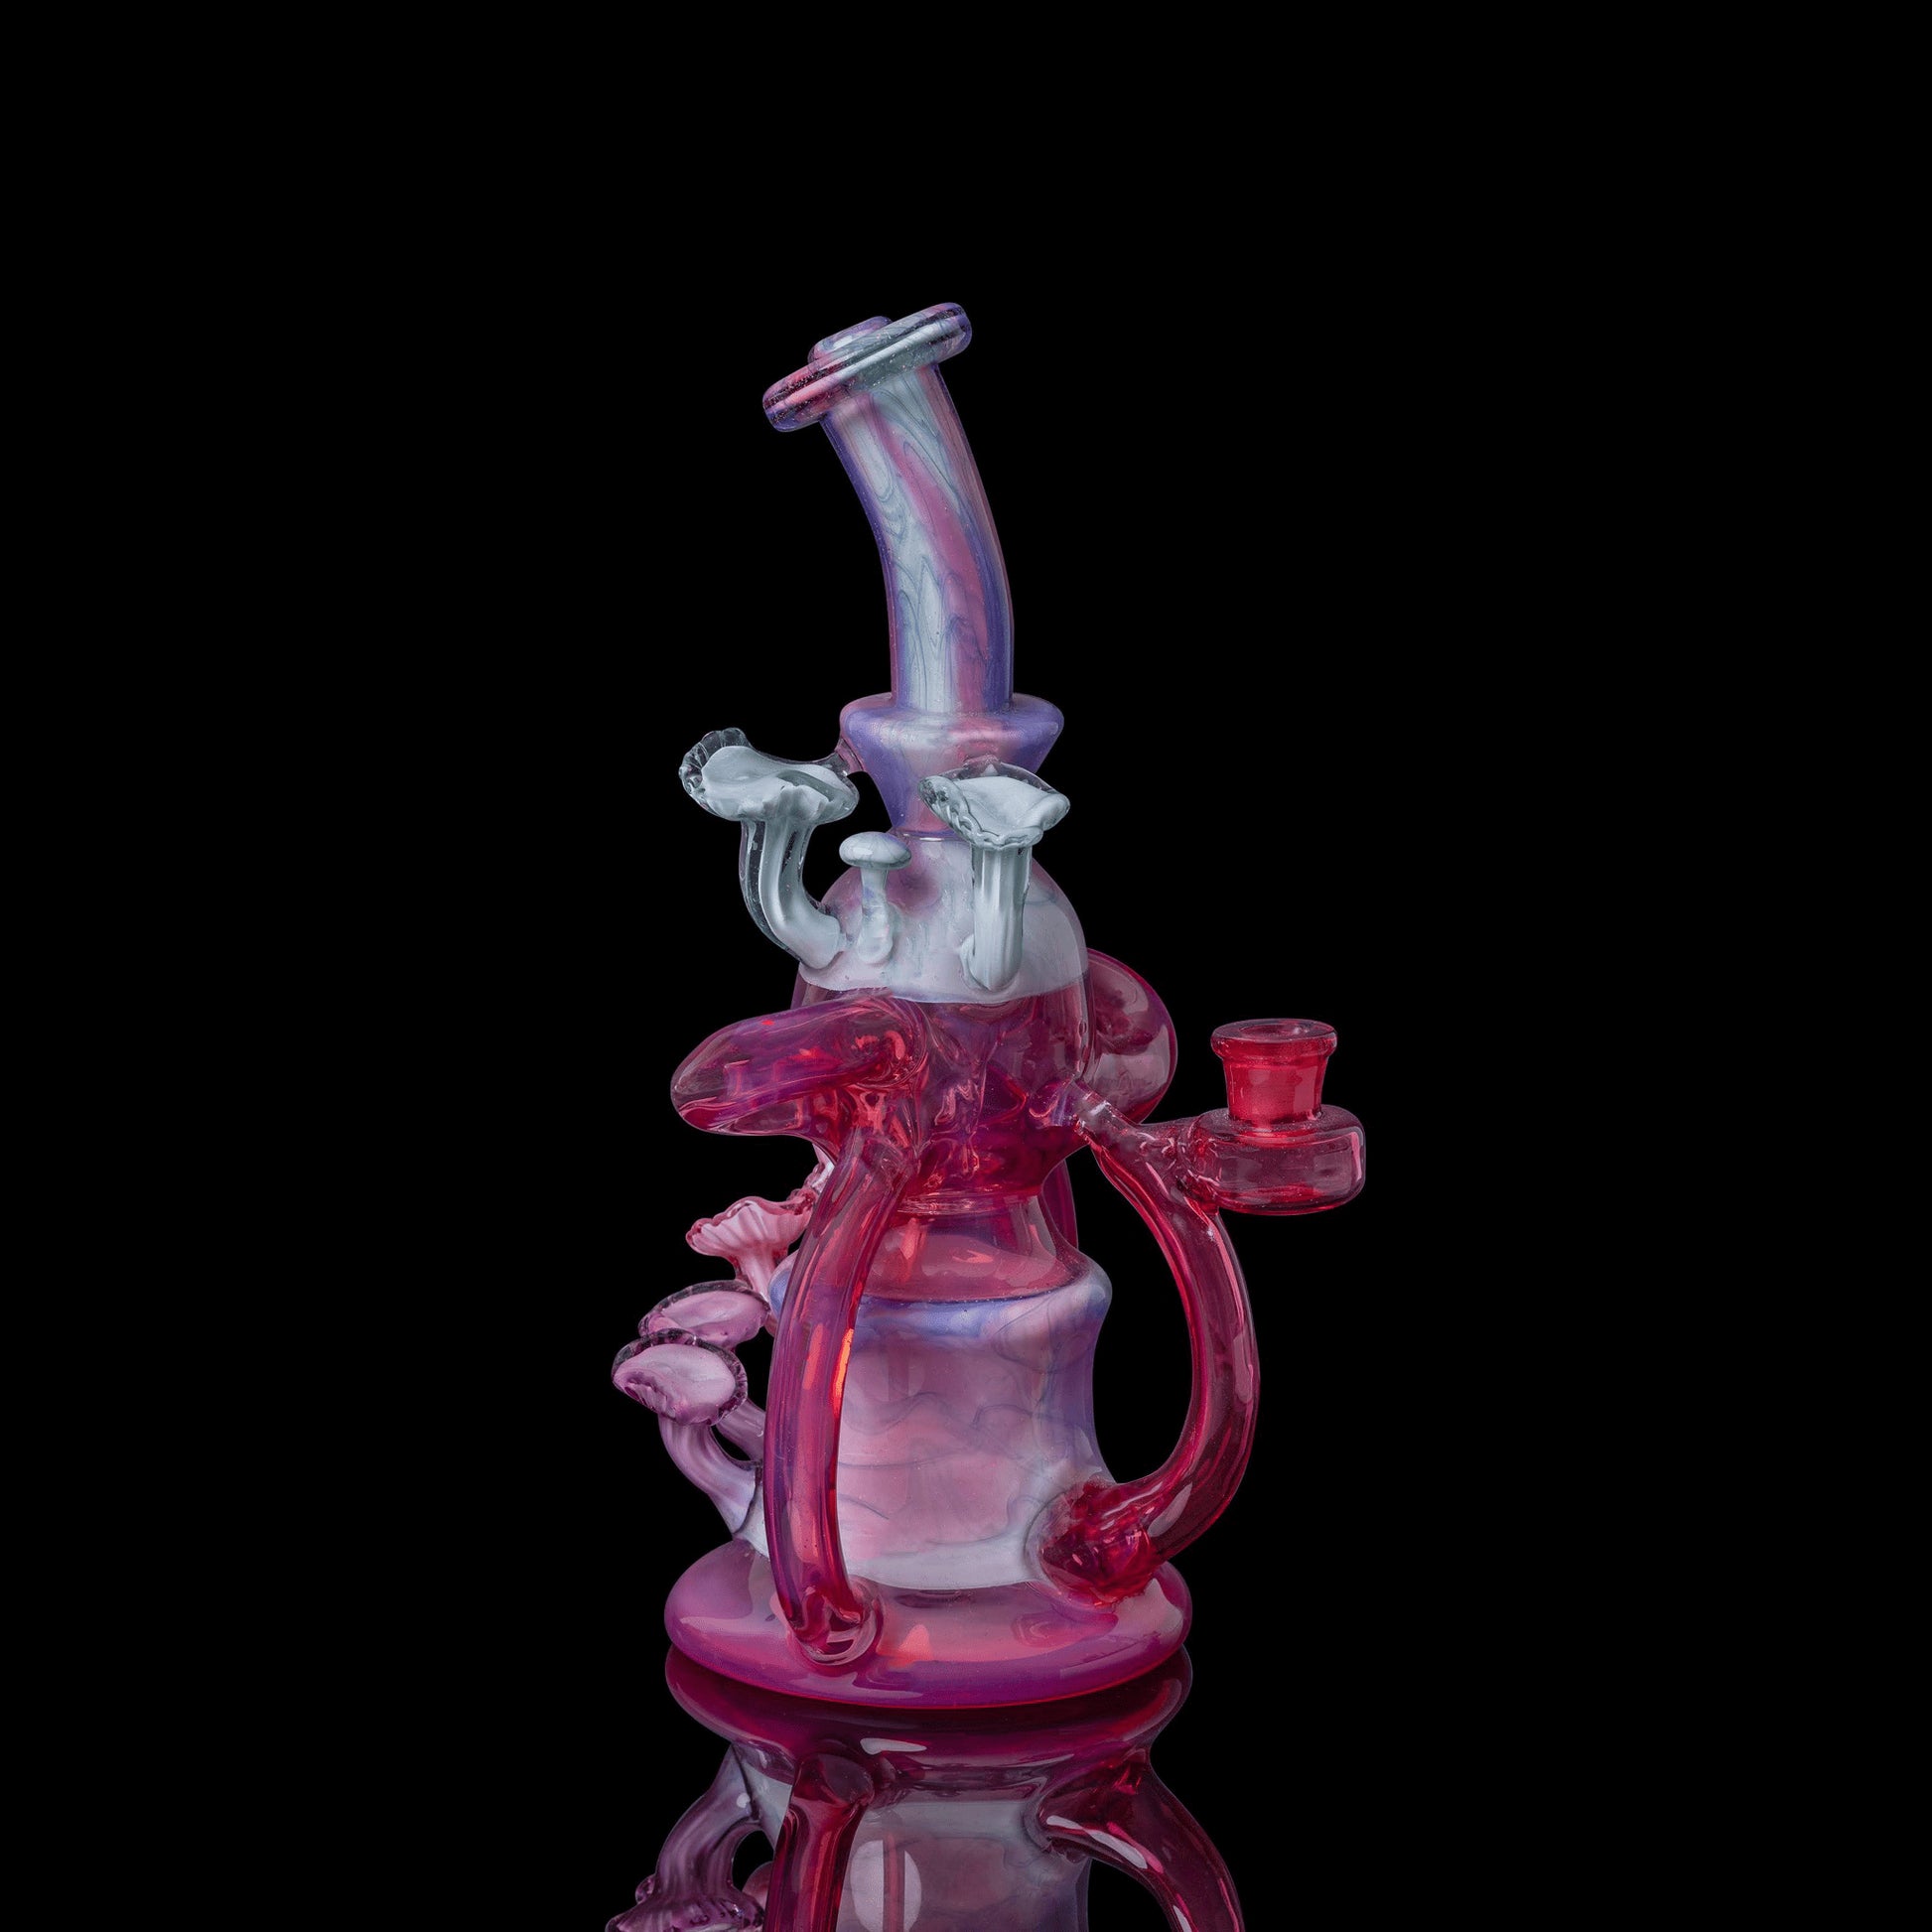 meticulously crafted art piece - Collab Reverse Klein Recycler by Pakoh x Scomo Moanet (Scribble Season 2022)